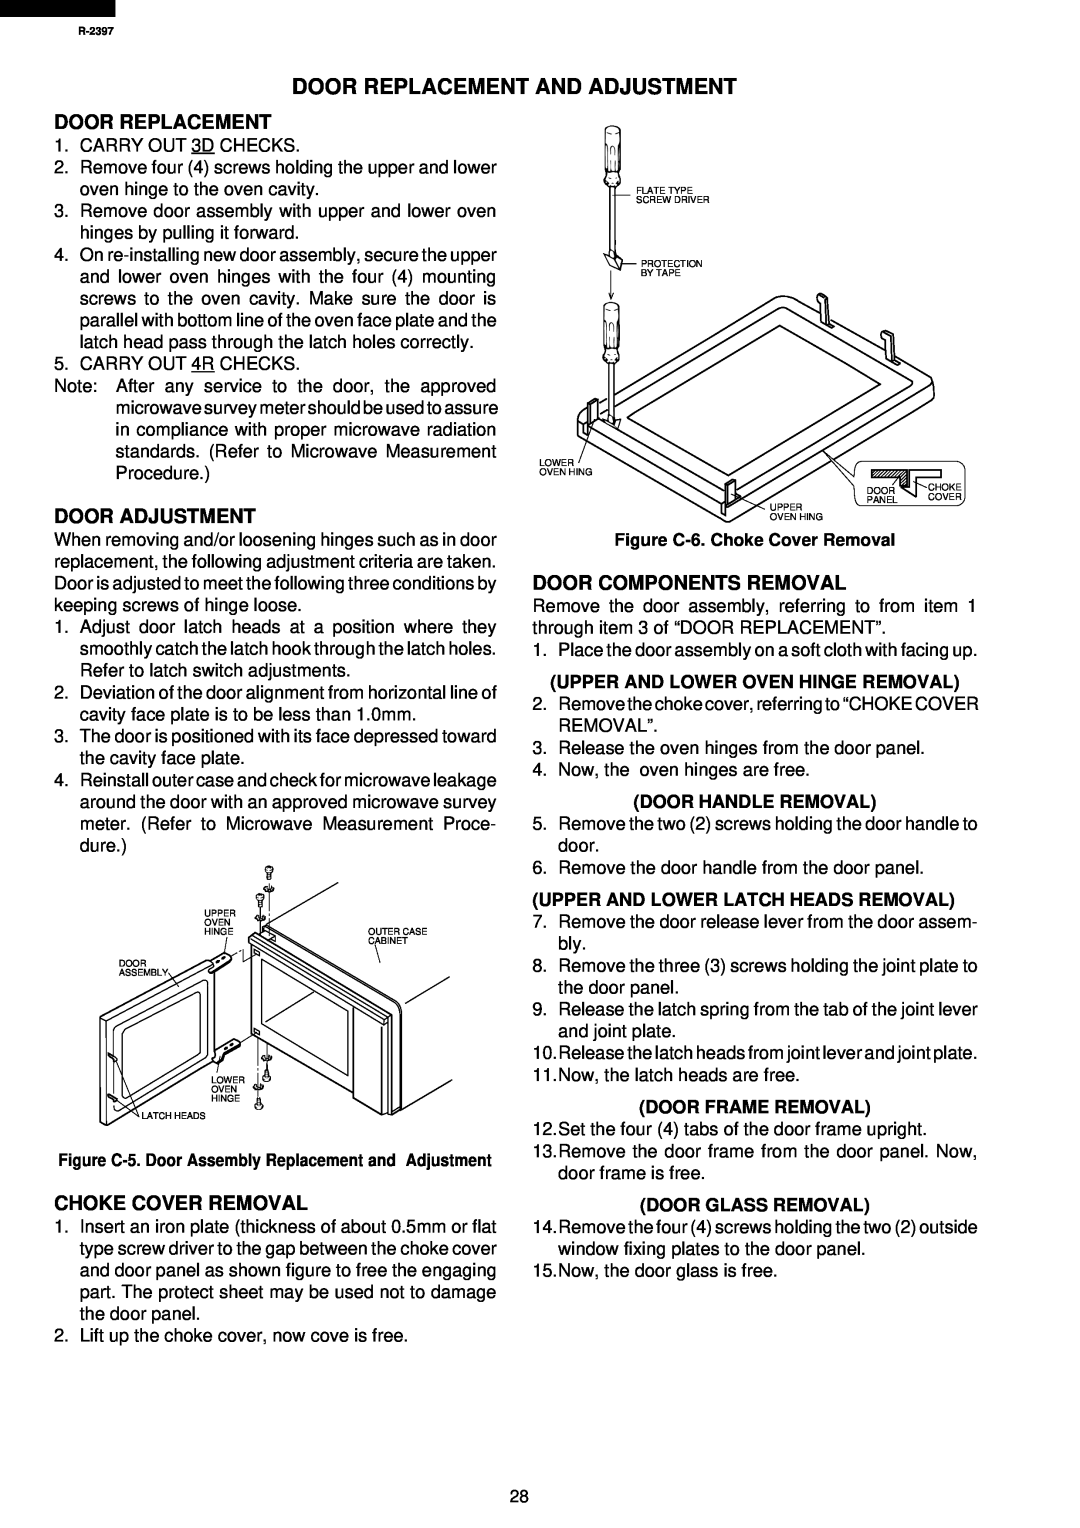 Sharp R-2397 service manual Door Replacement And Adjustment, Door Adjustment, Choke Cover Removal, Door Components Removal 